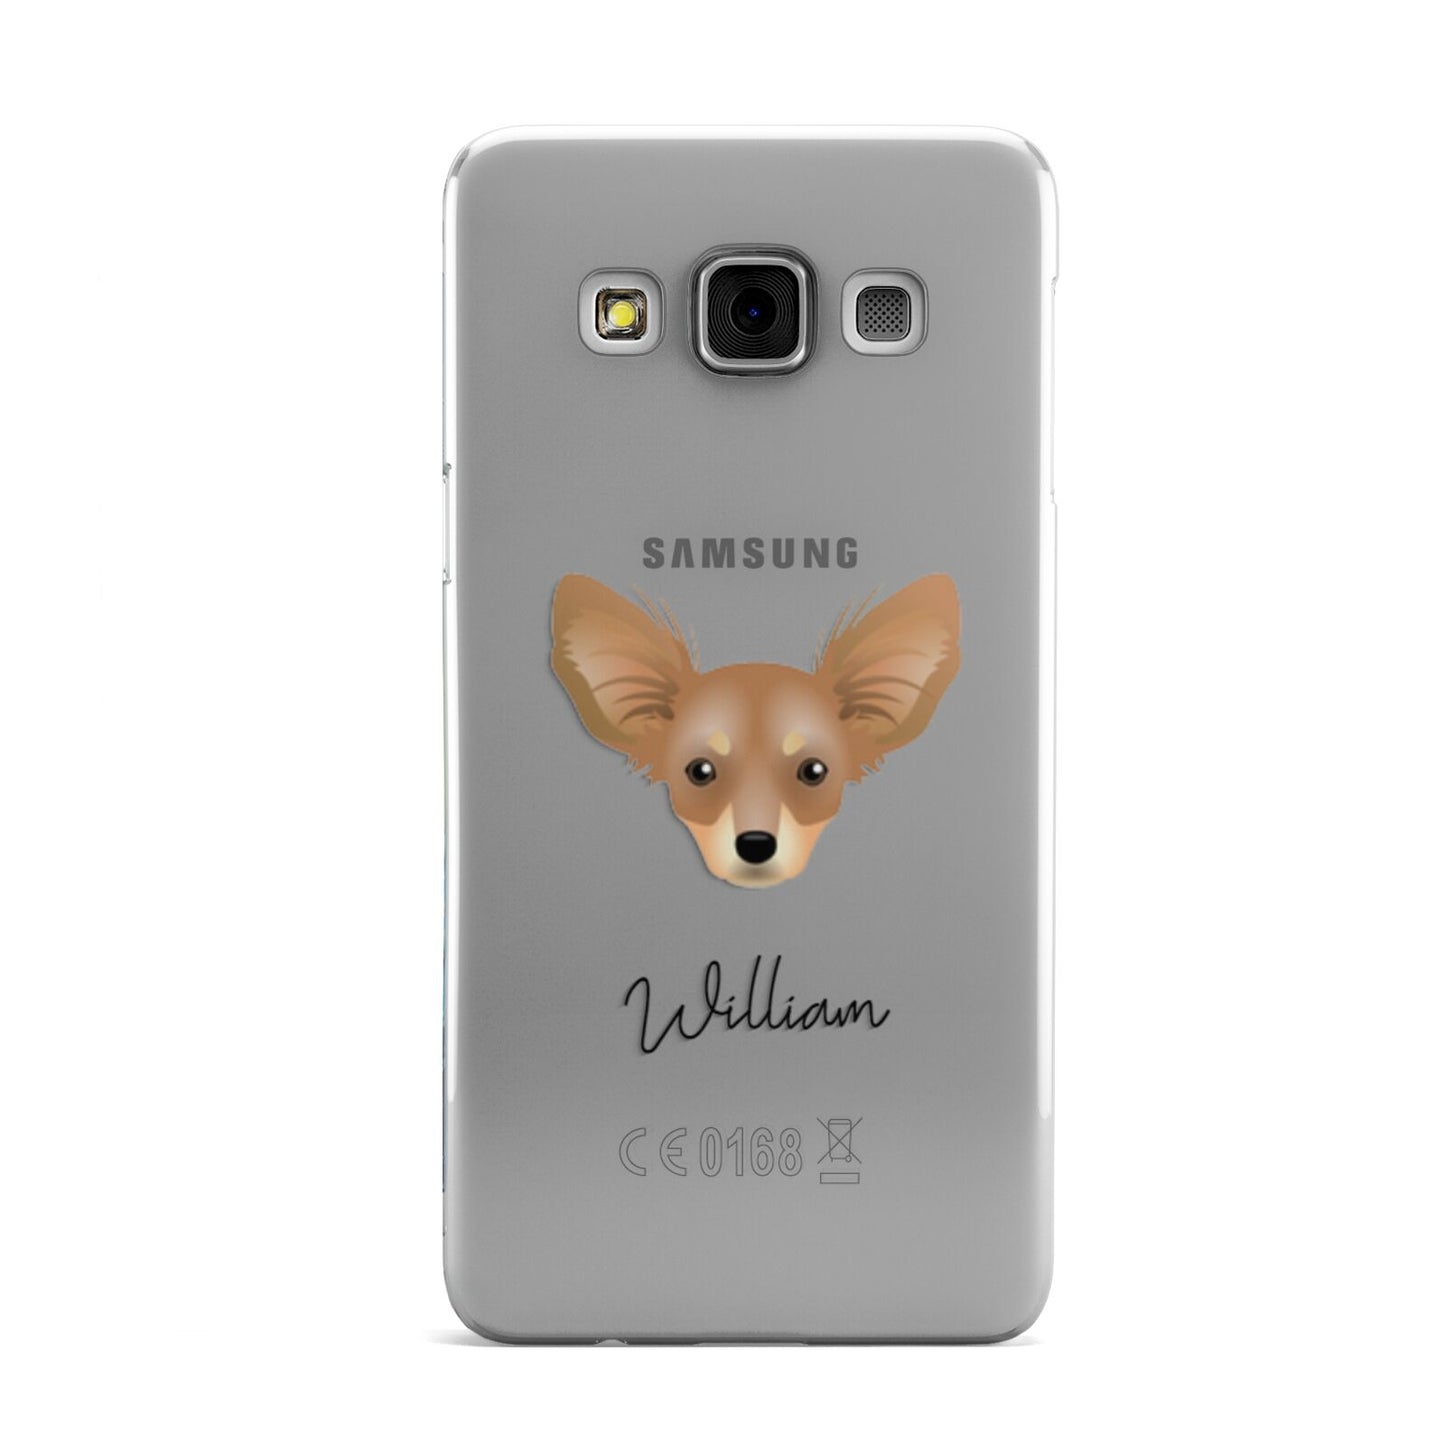 Russian Toy Personalised Samsung Galaxy A3 Case